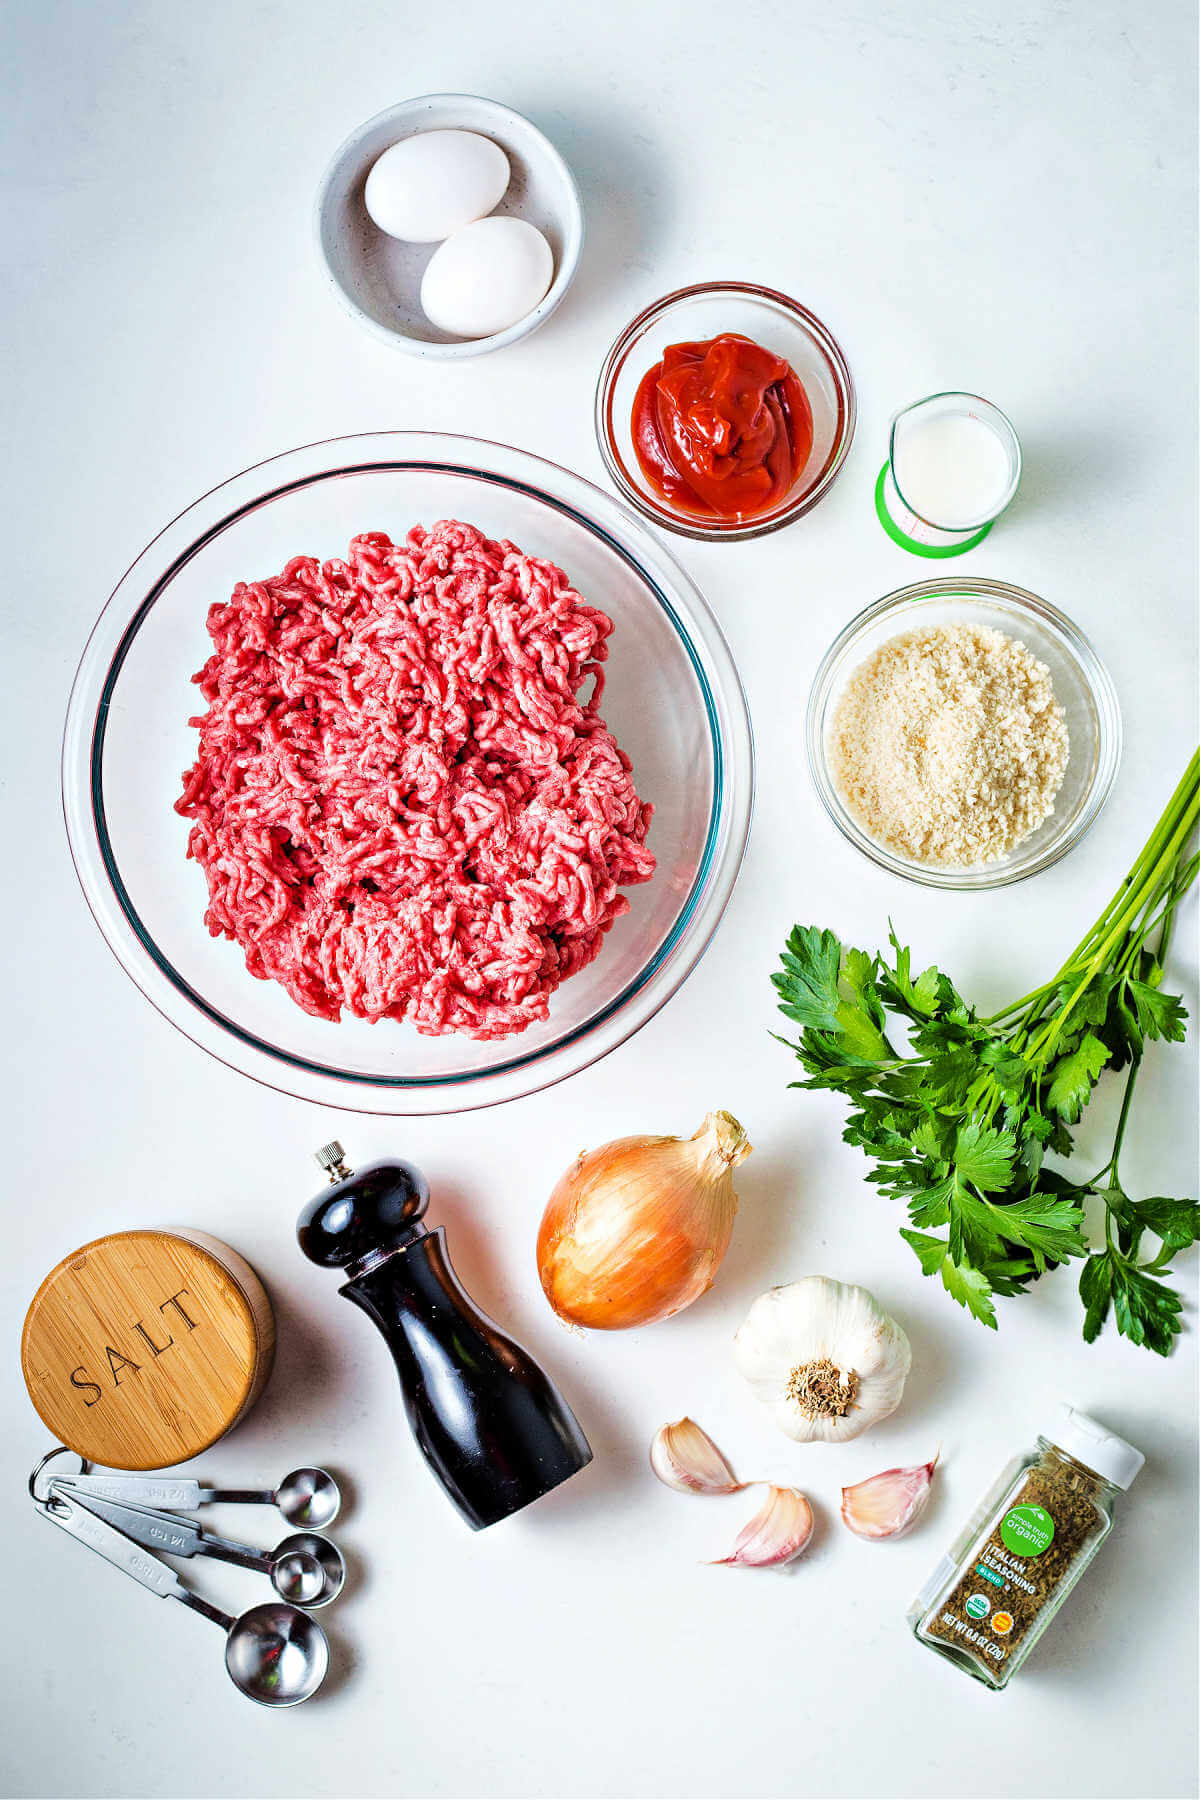 ingredients for smoked meatloaf on a table.